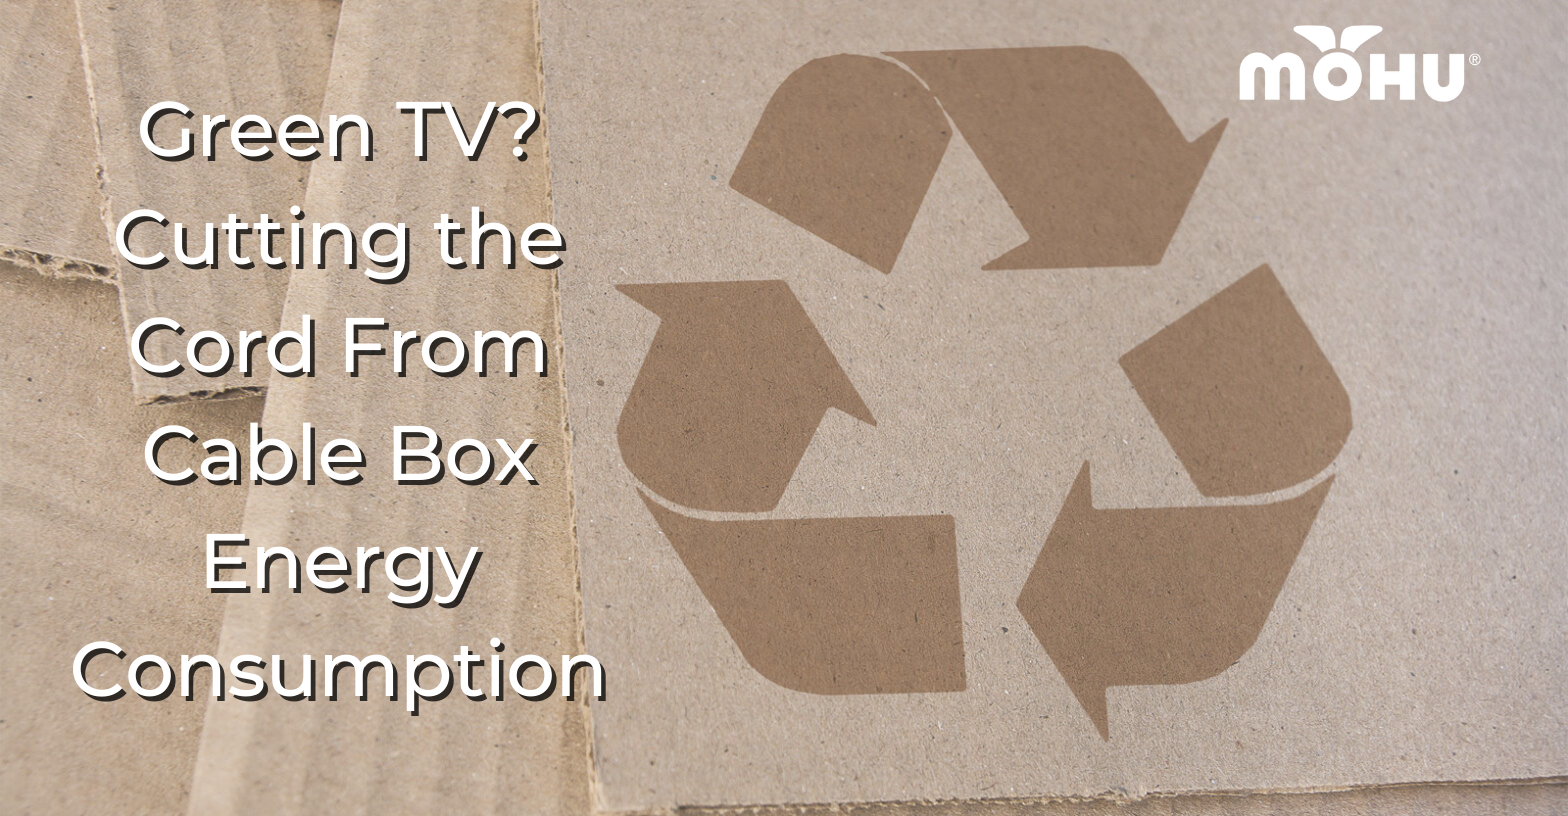 Recycling mark on cardboard boxes, Green TV Cutting the Cord From Cable Box Energy Consumption, Mohu